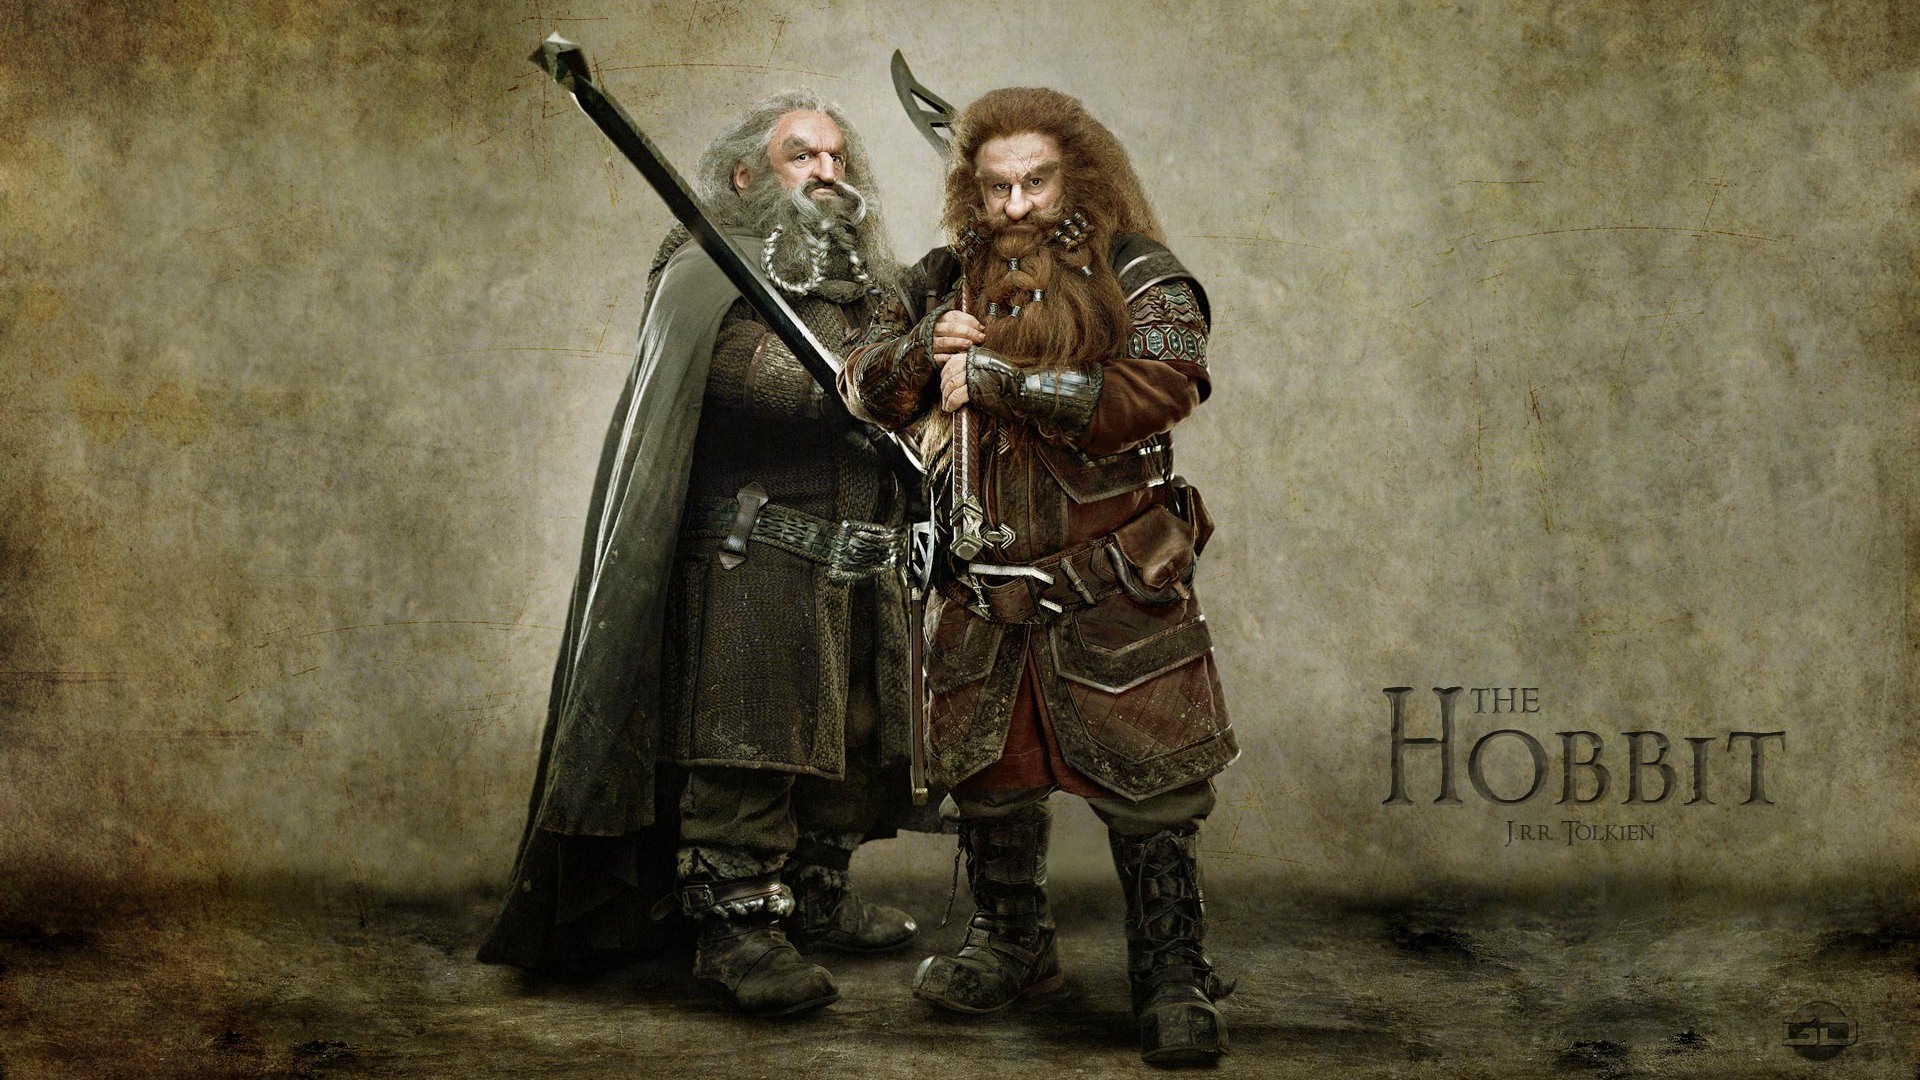 The Hobbit: An Unexpected Journey HD wallpapers #6 - 1920x1080